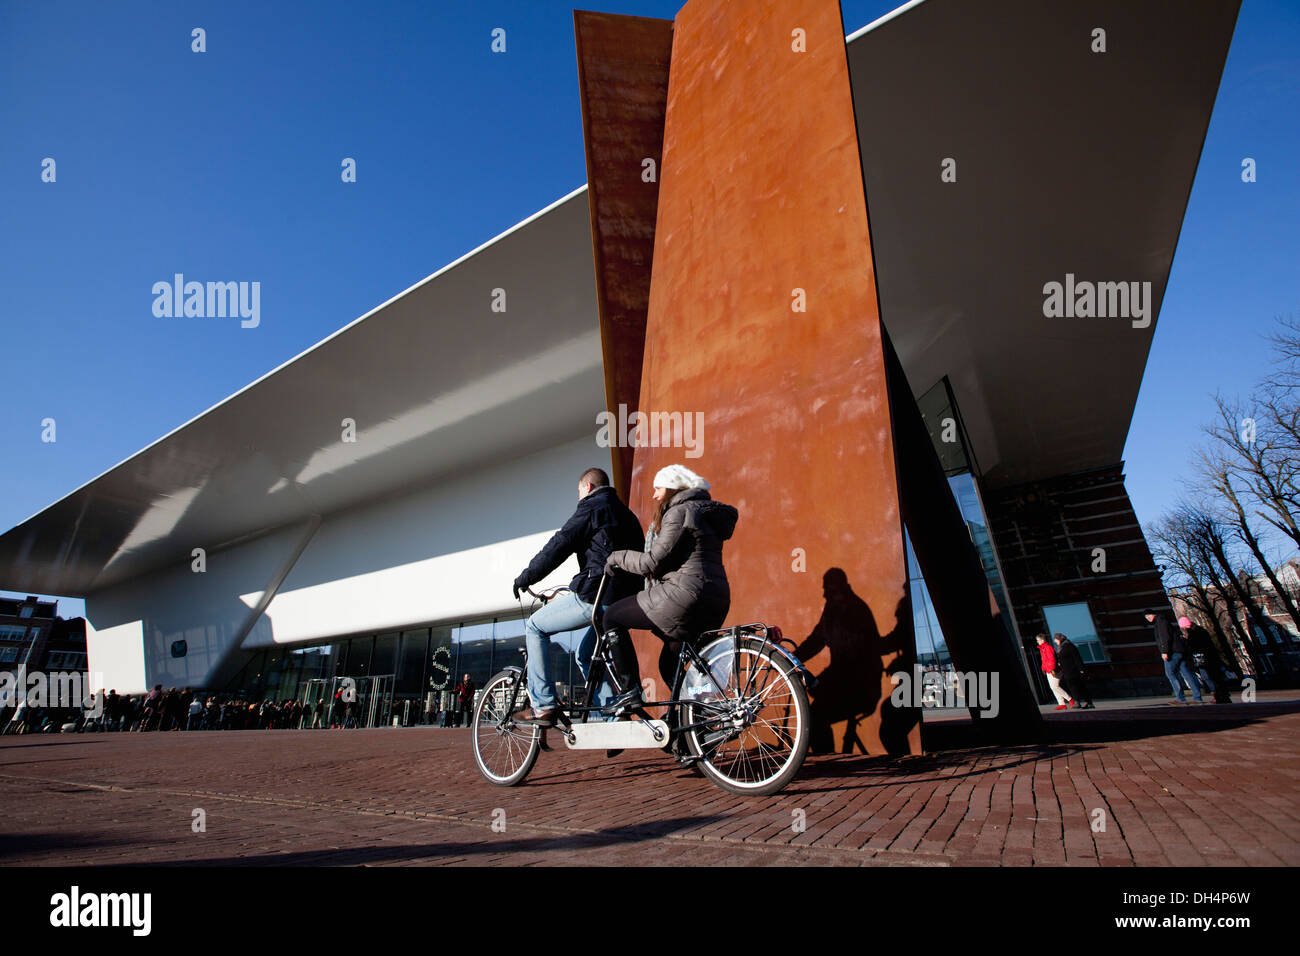 Netherlands, Amsterdam, New annex of the Stedelijk Museum popularly called The Bathtub. Couple on tandem bicycle Stock Photo